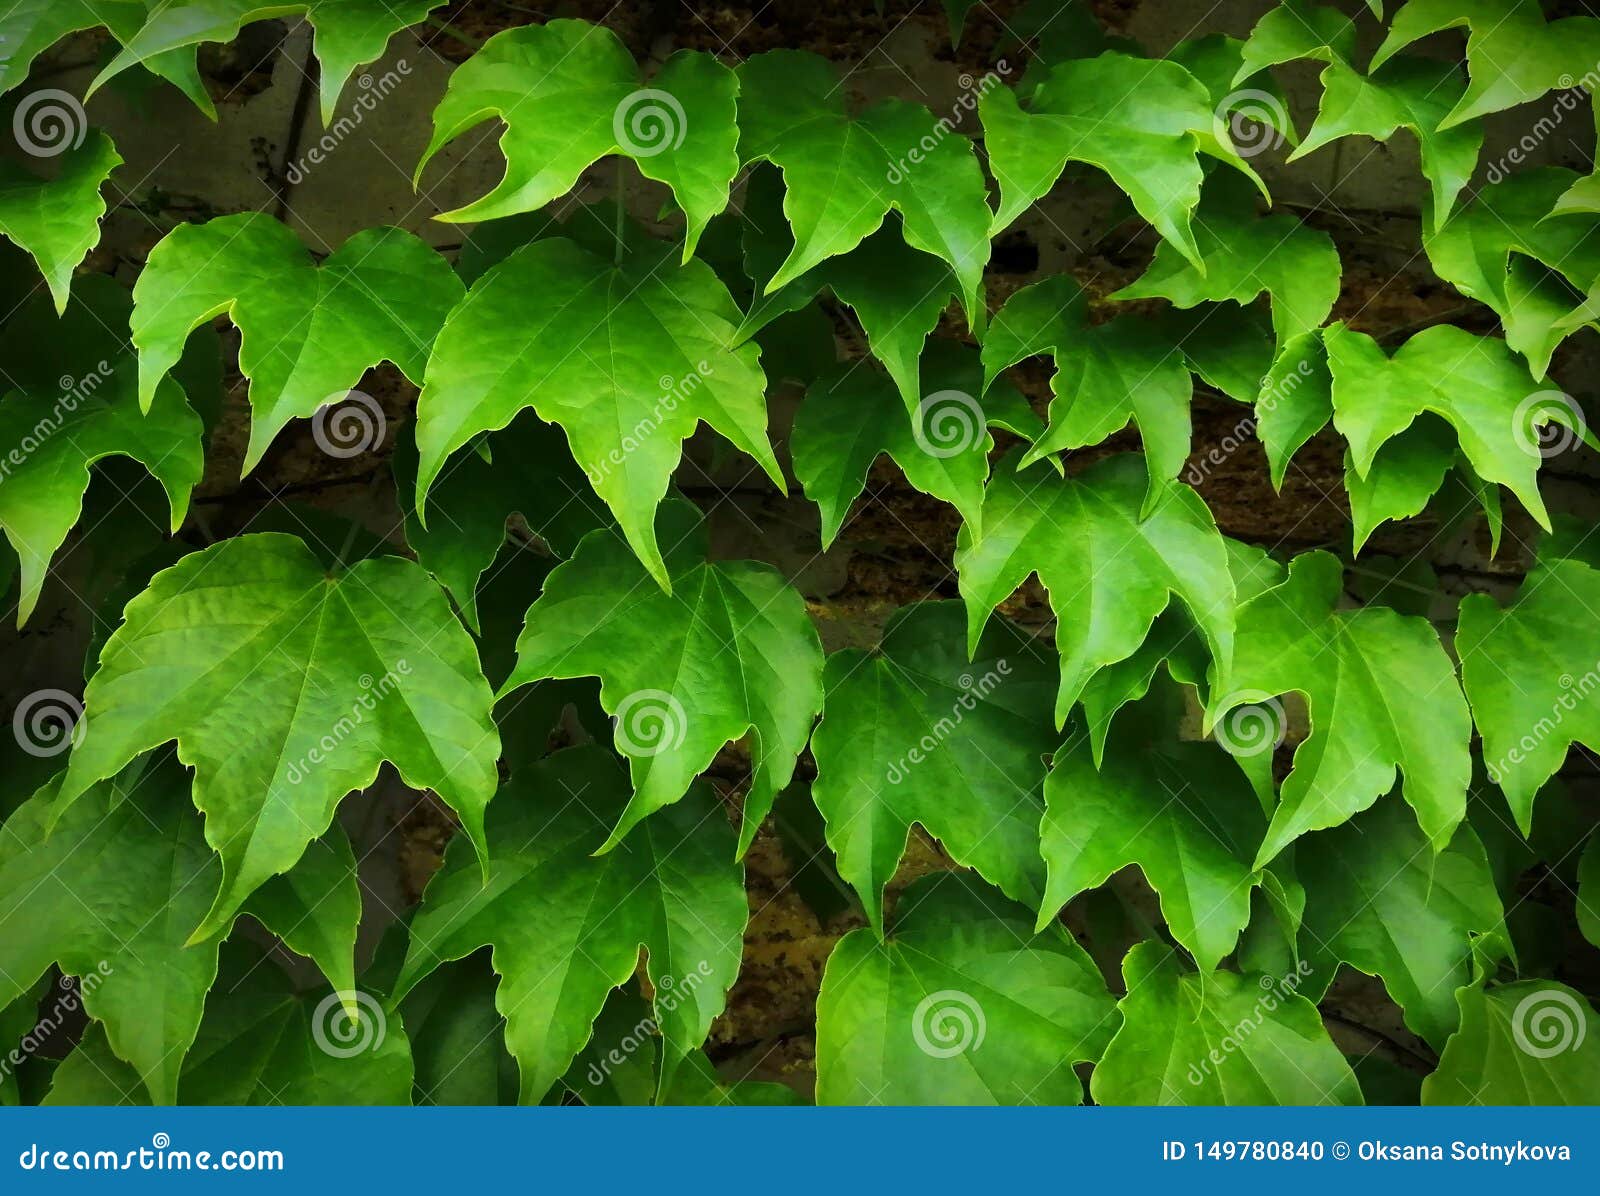 Large Leaves Of Green Climbing Grapes Growing On A Brick Wall Background For The Cover Of The Site Stock Photo Image Of Nature Green 149780840